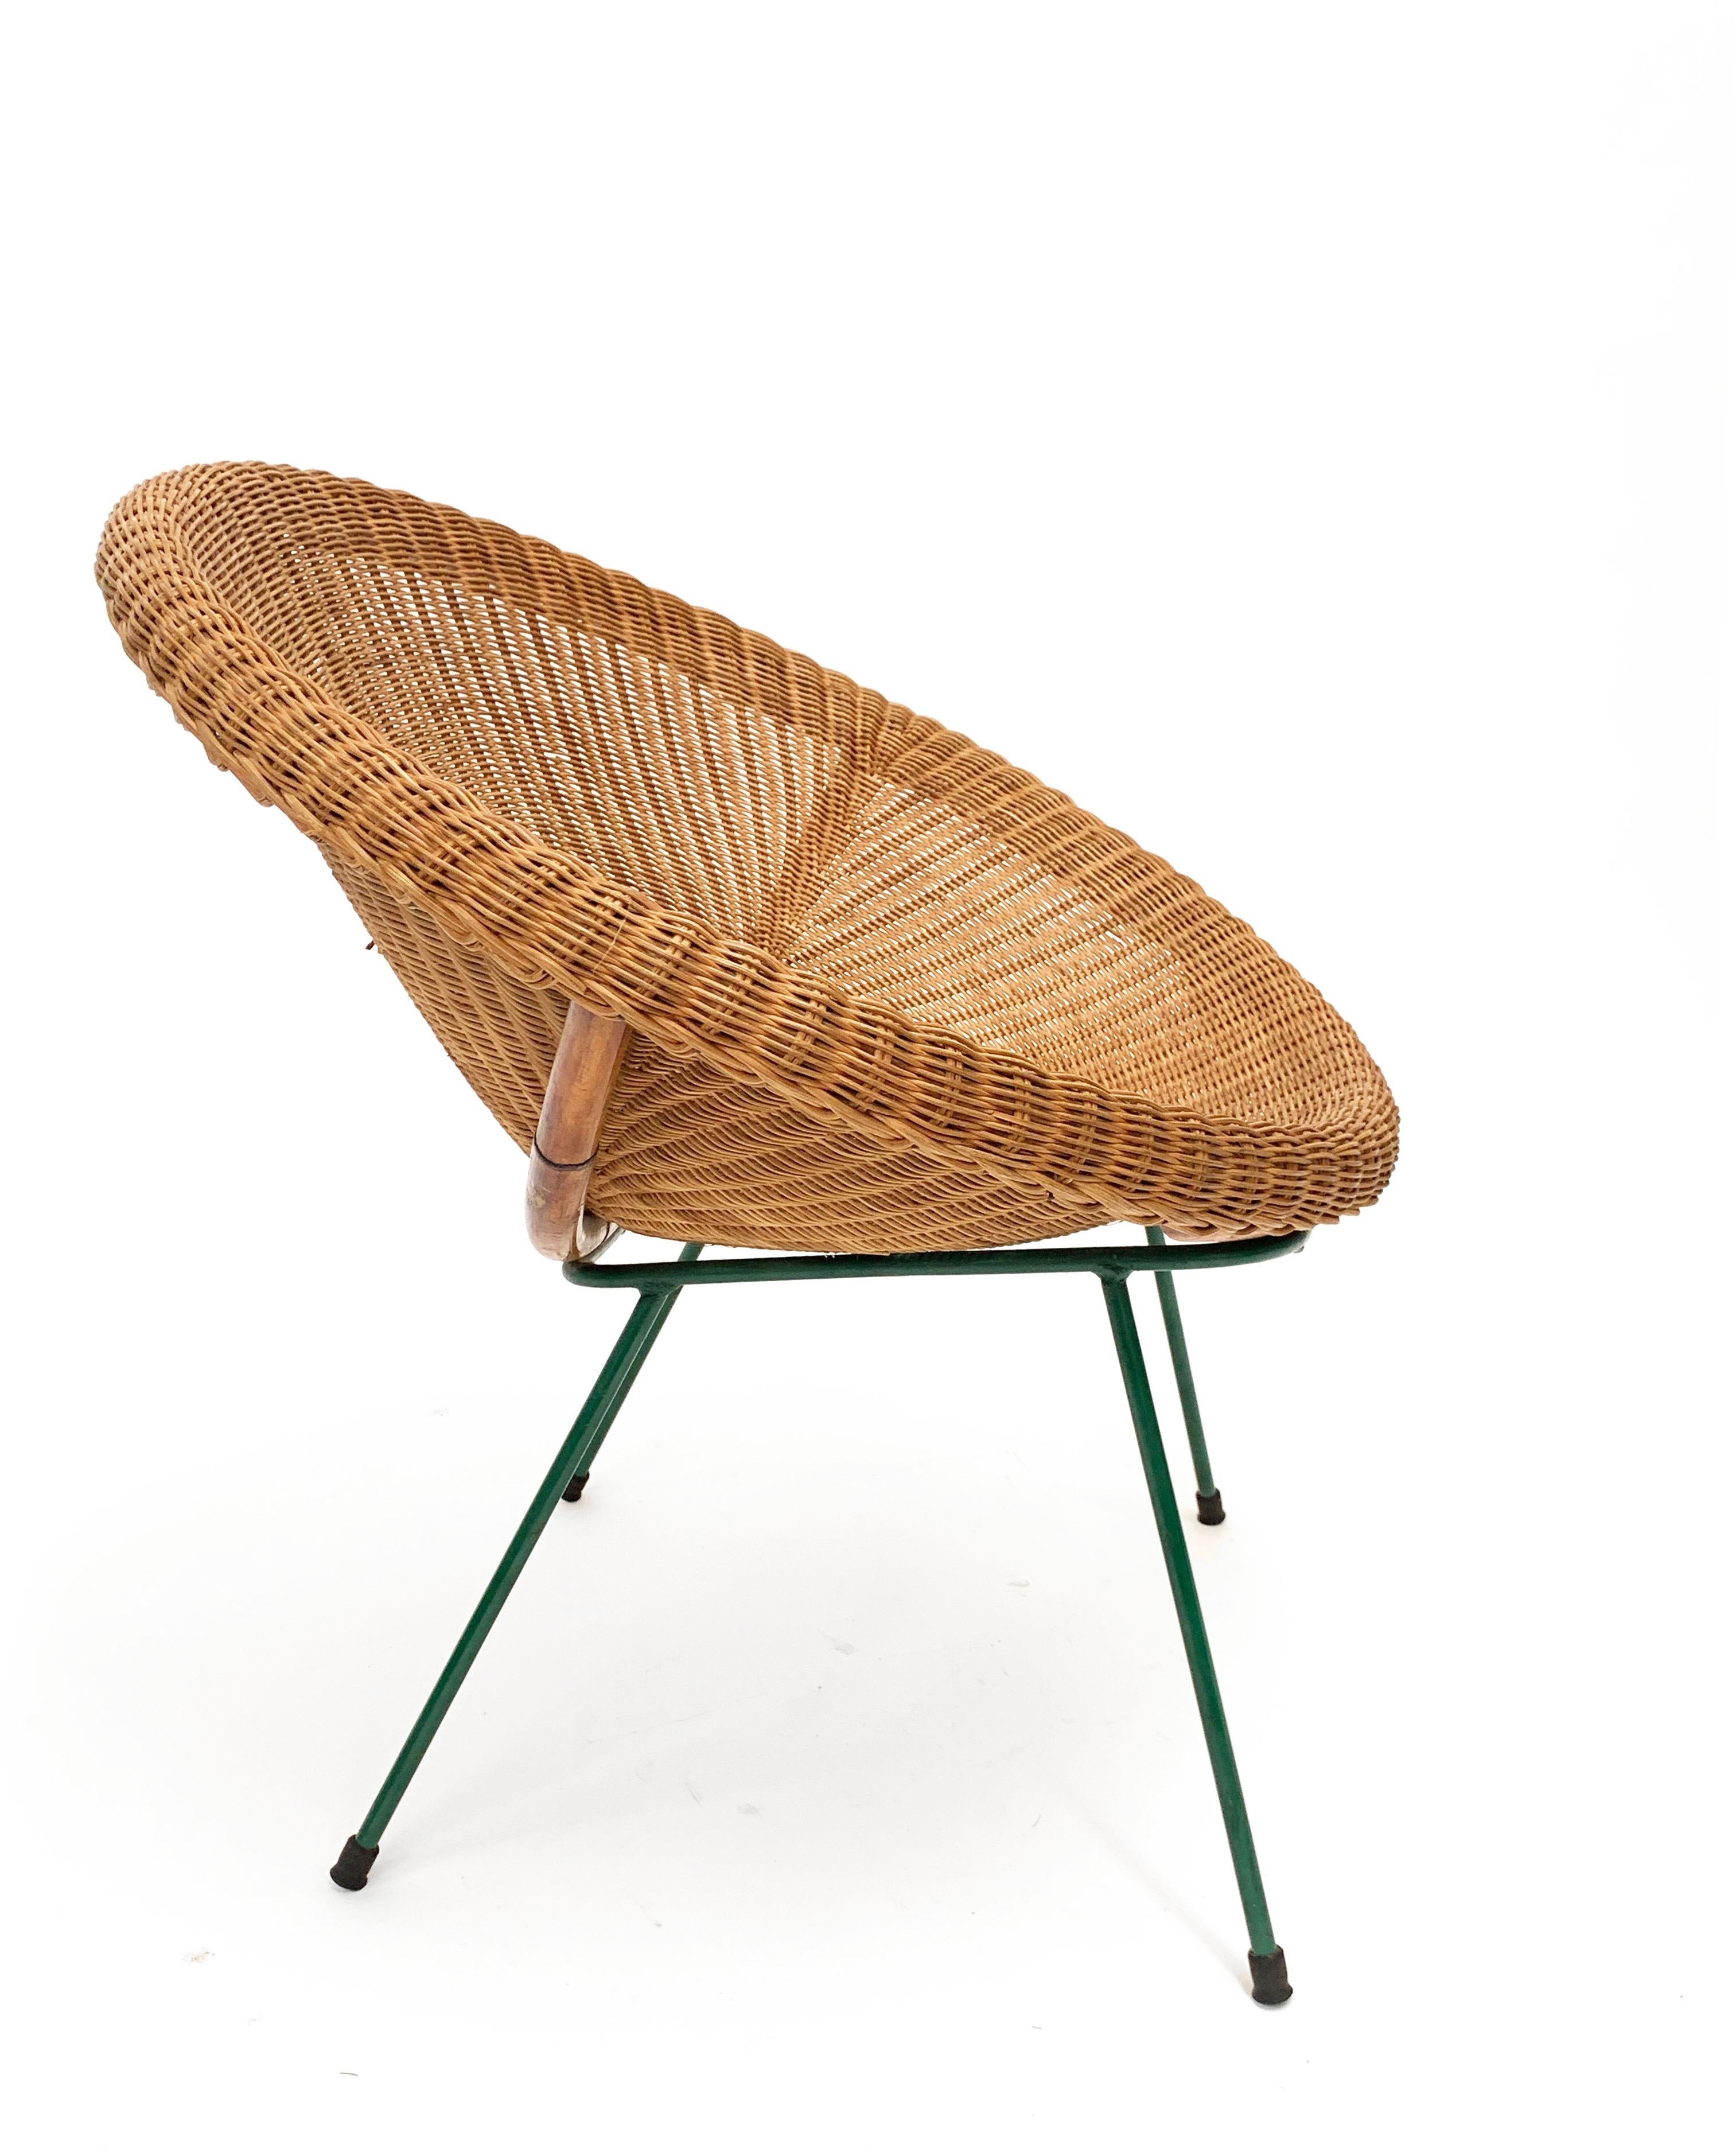 Amazing midcentury rattan and bamboo shell armchair with lacquered green metal legs. This wonderful piece was produced in Italy during 1950s.

This item is very elegant as it has a simple bamboo structure with a peculiar rattan seat lying on thin